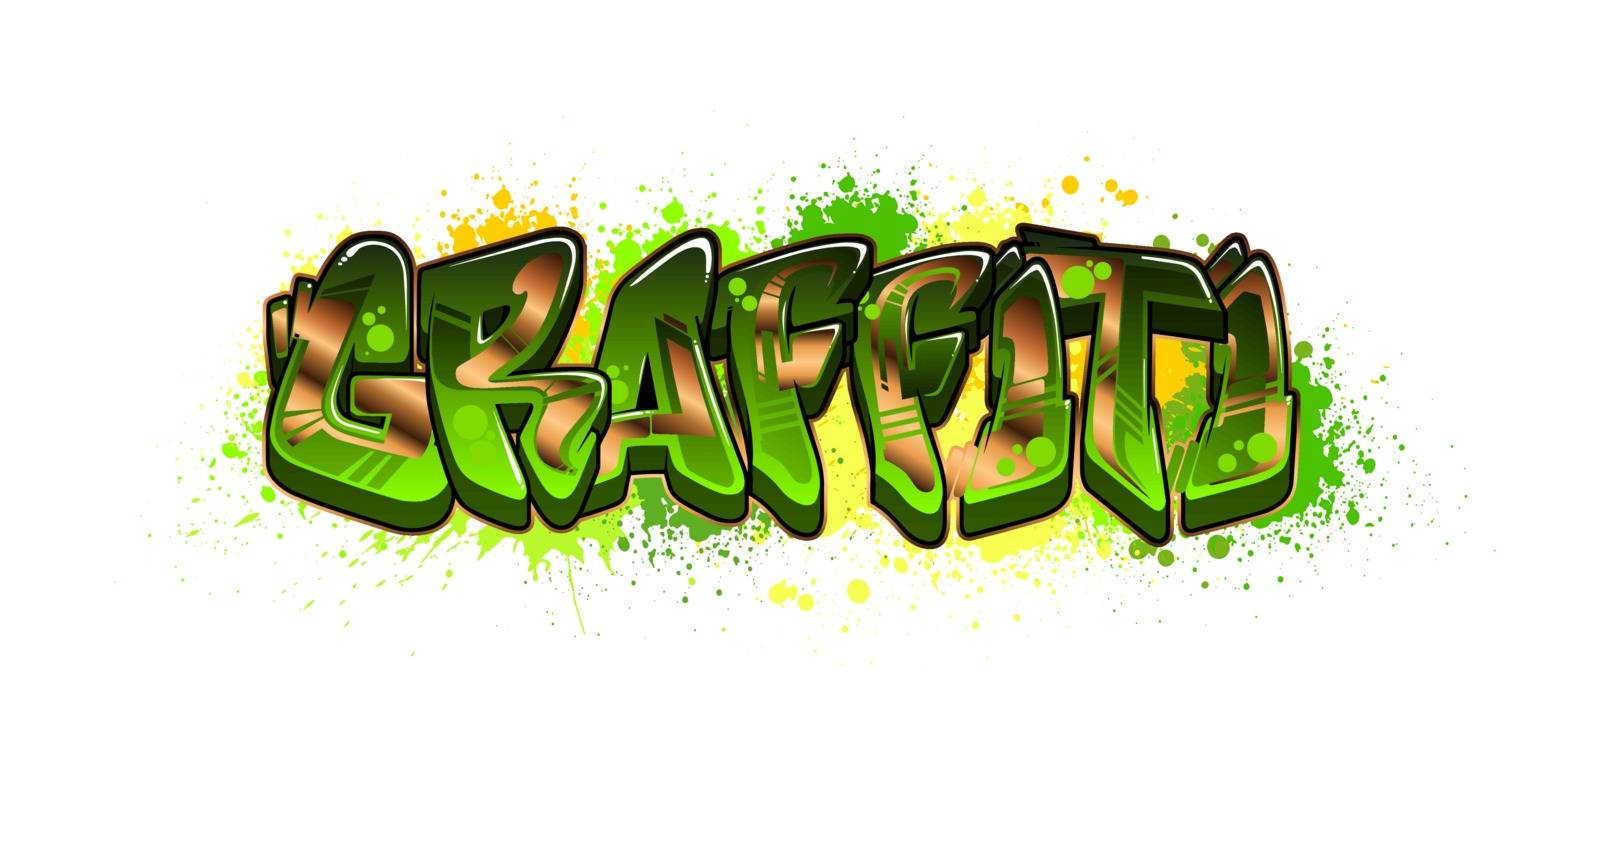 A cool Graffiti styled logotype design. Legible letters aimed for a wide range audience of all ages.